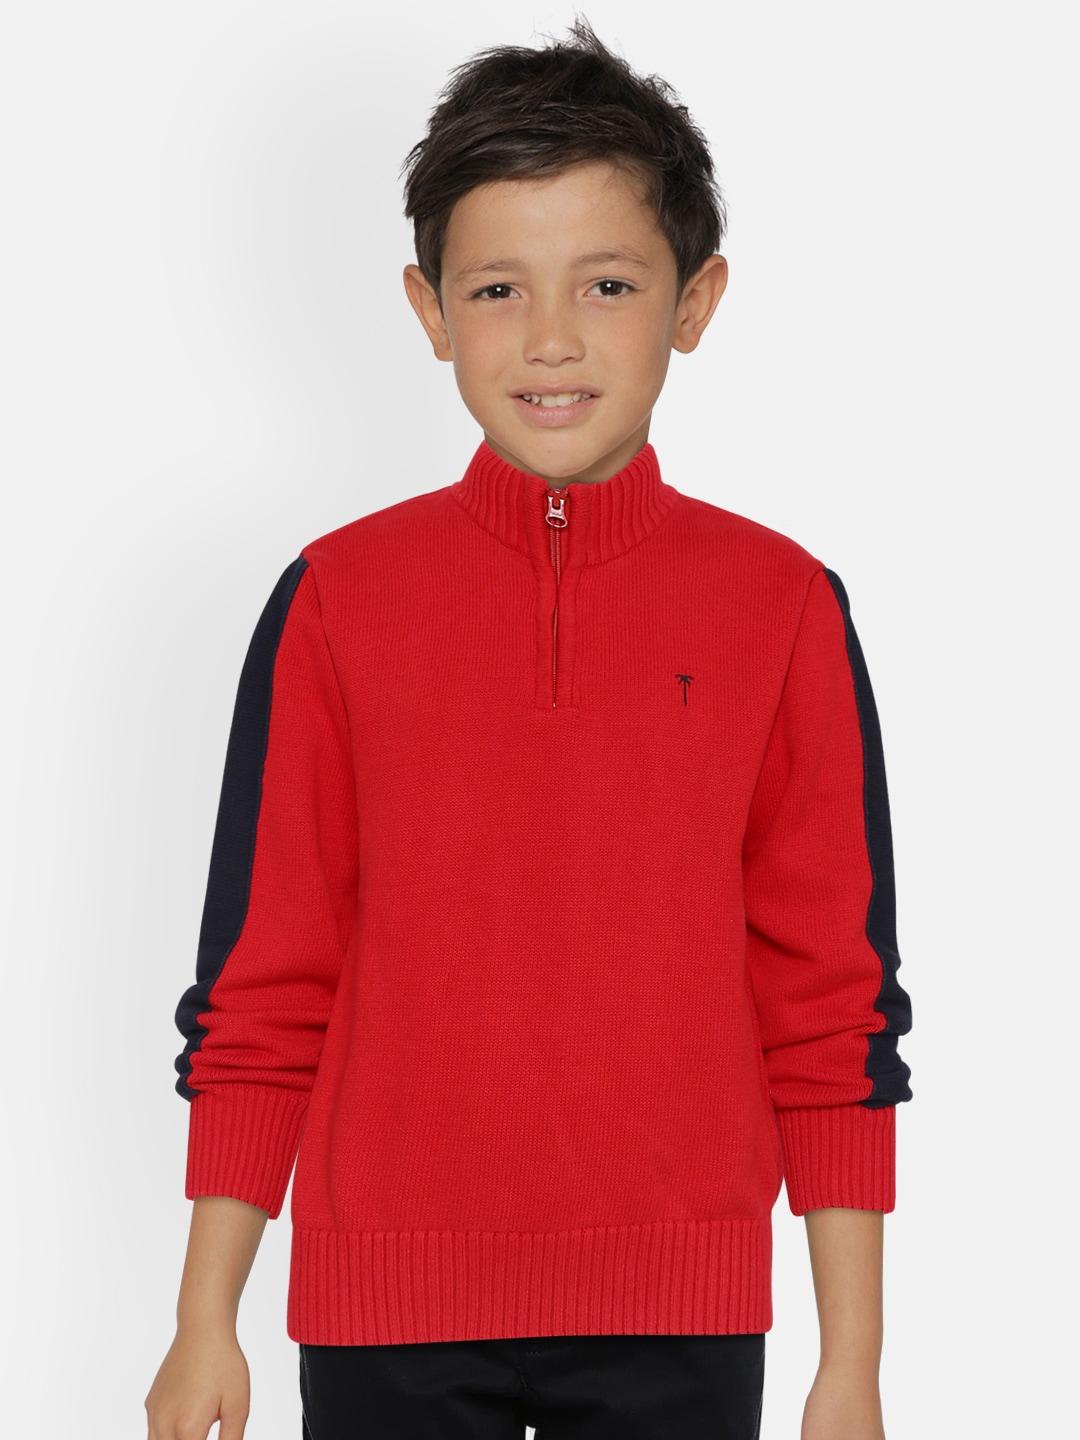 Palm Tree Boys Red Solid Sweater